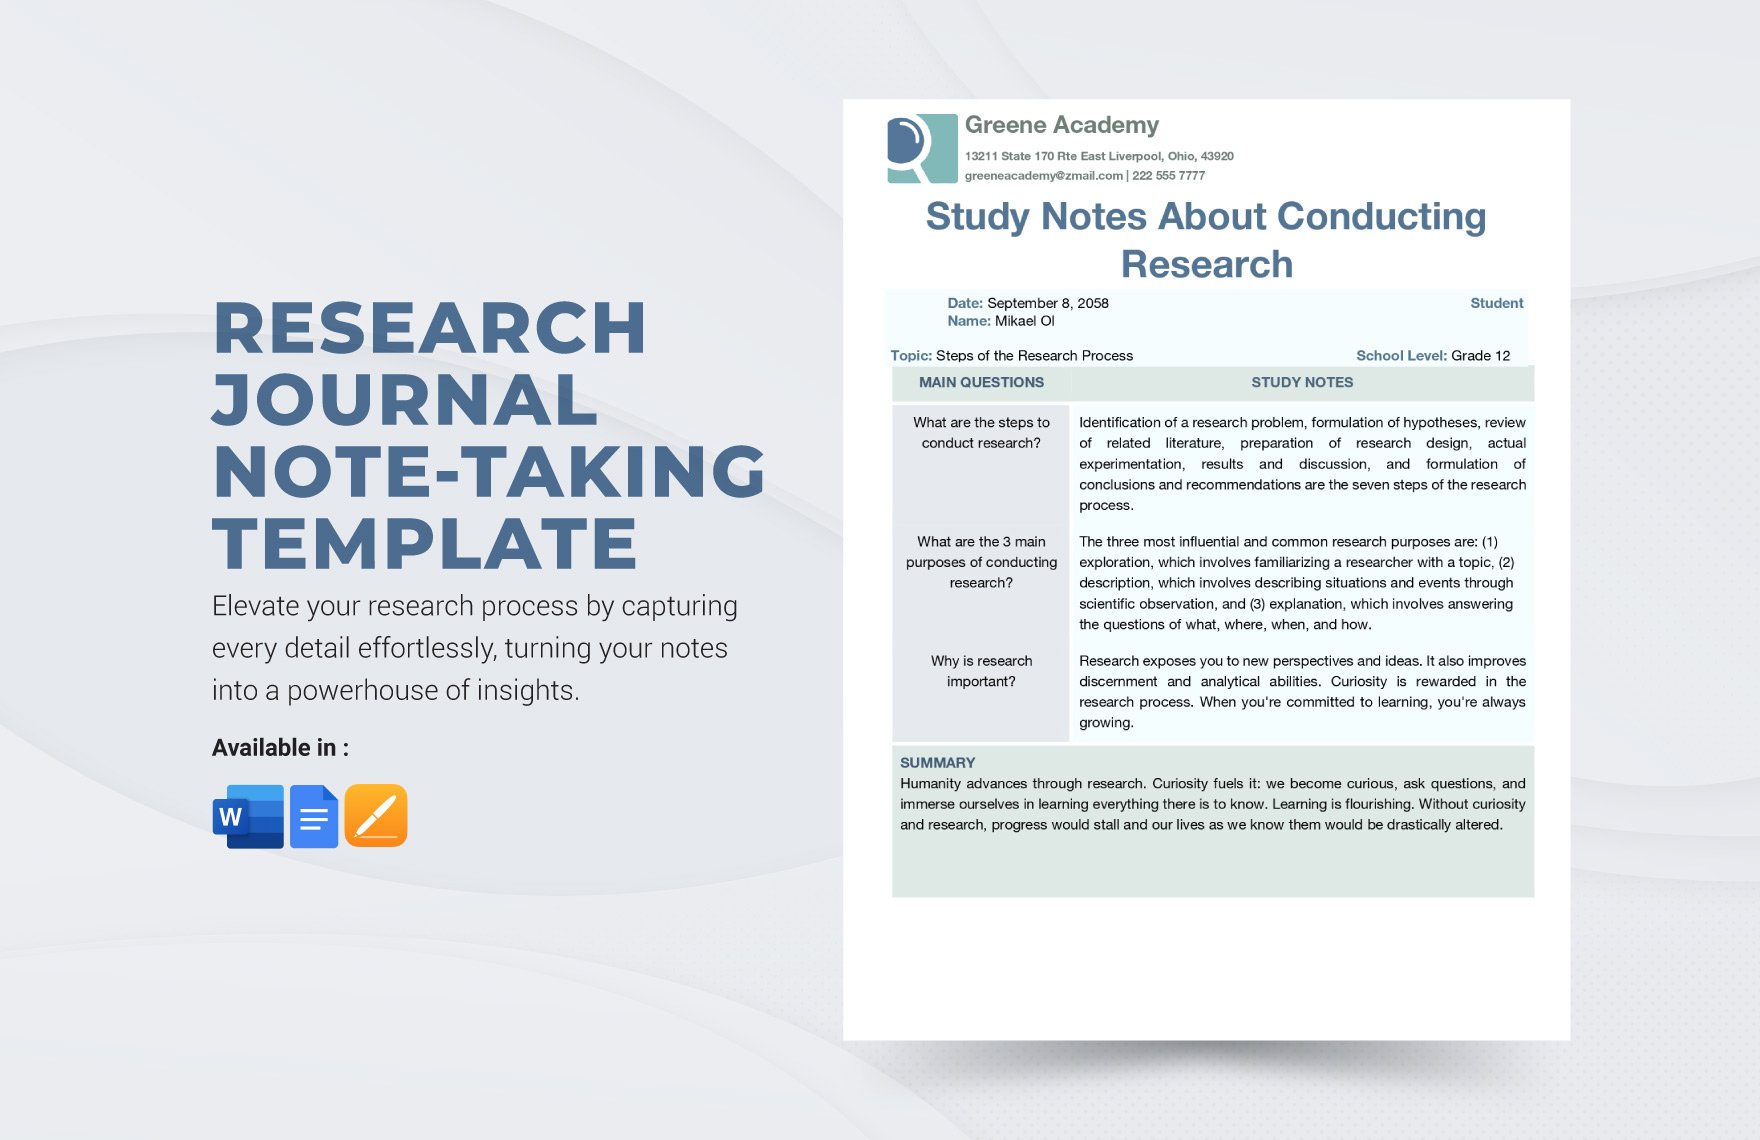 Research Journal Note-taking Template